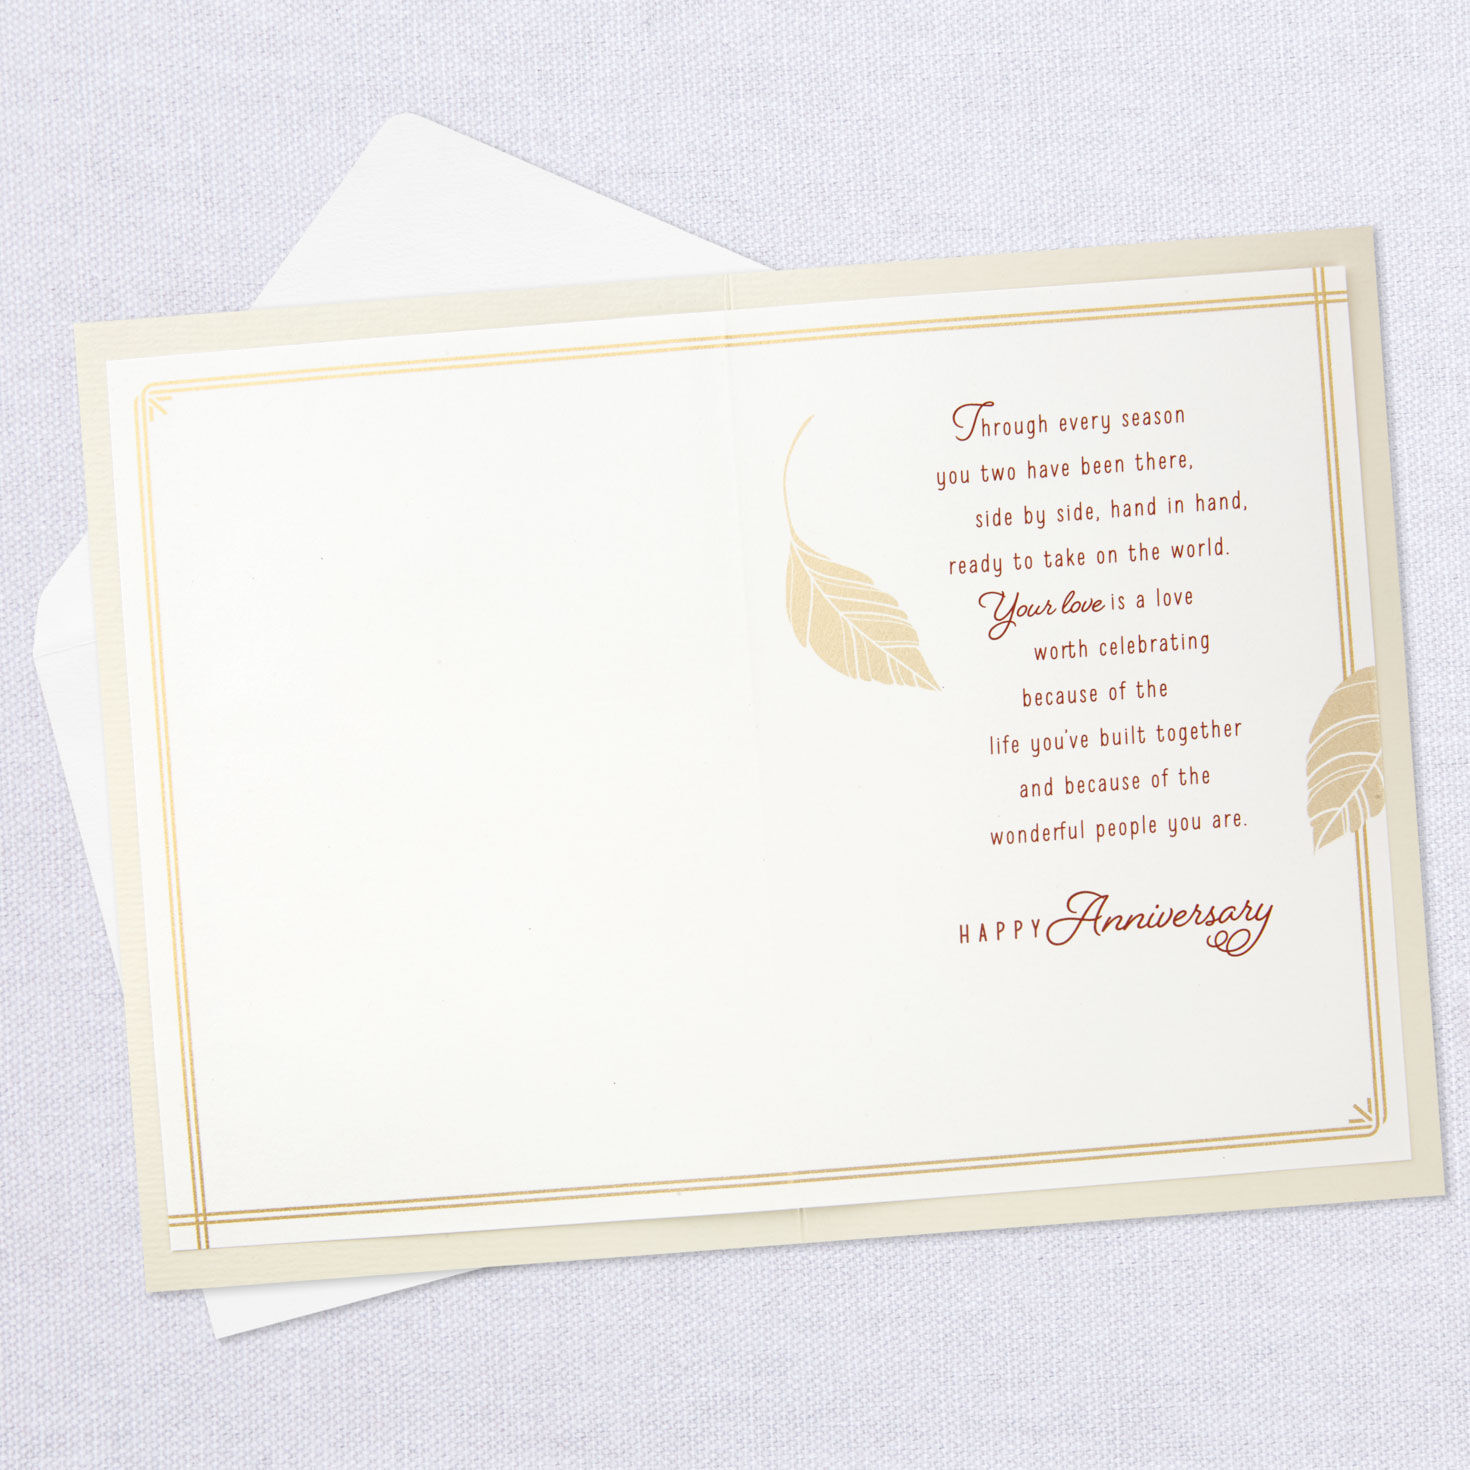 PARENTS ANNIVERSARY Card for MOM and DAD on Your Anniversary BY Hallmark 52B 1 